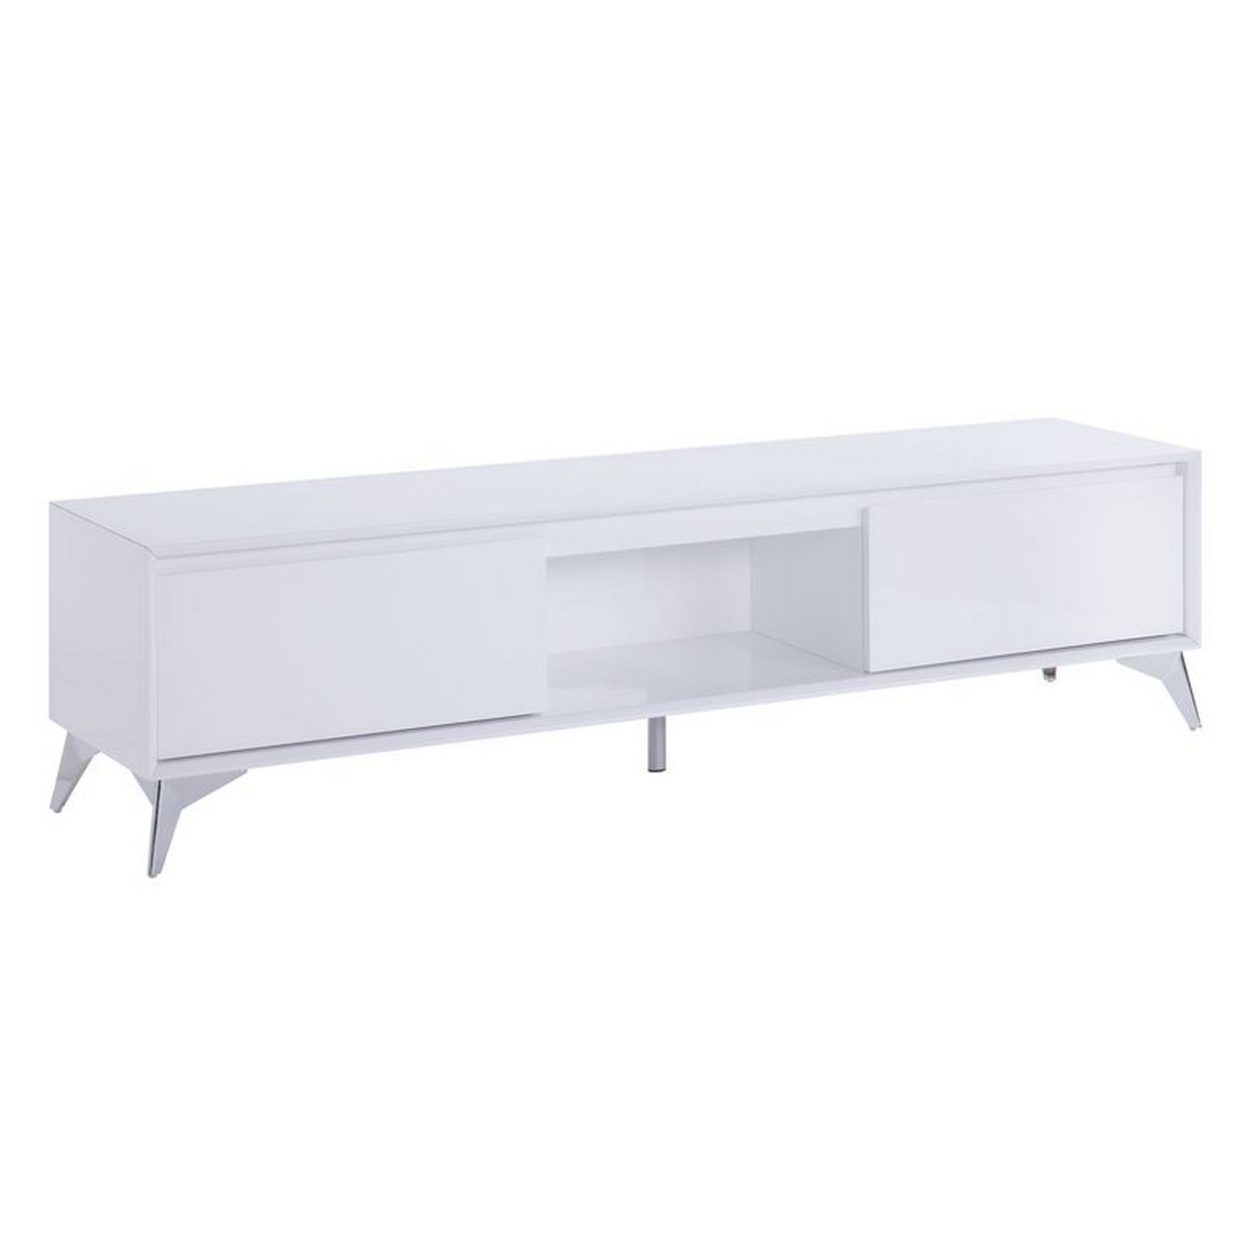 TV Stand With 2 Door Storage And LED Touch Light, White- Saltoro Sherpi